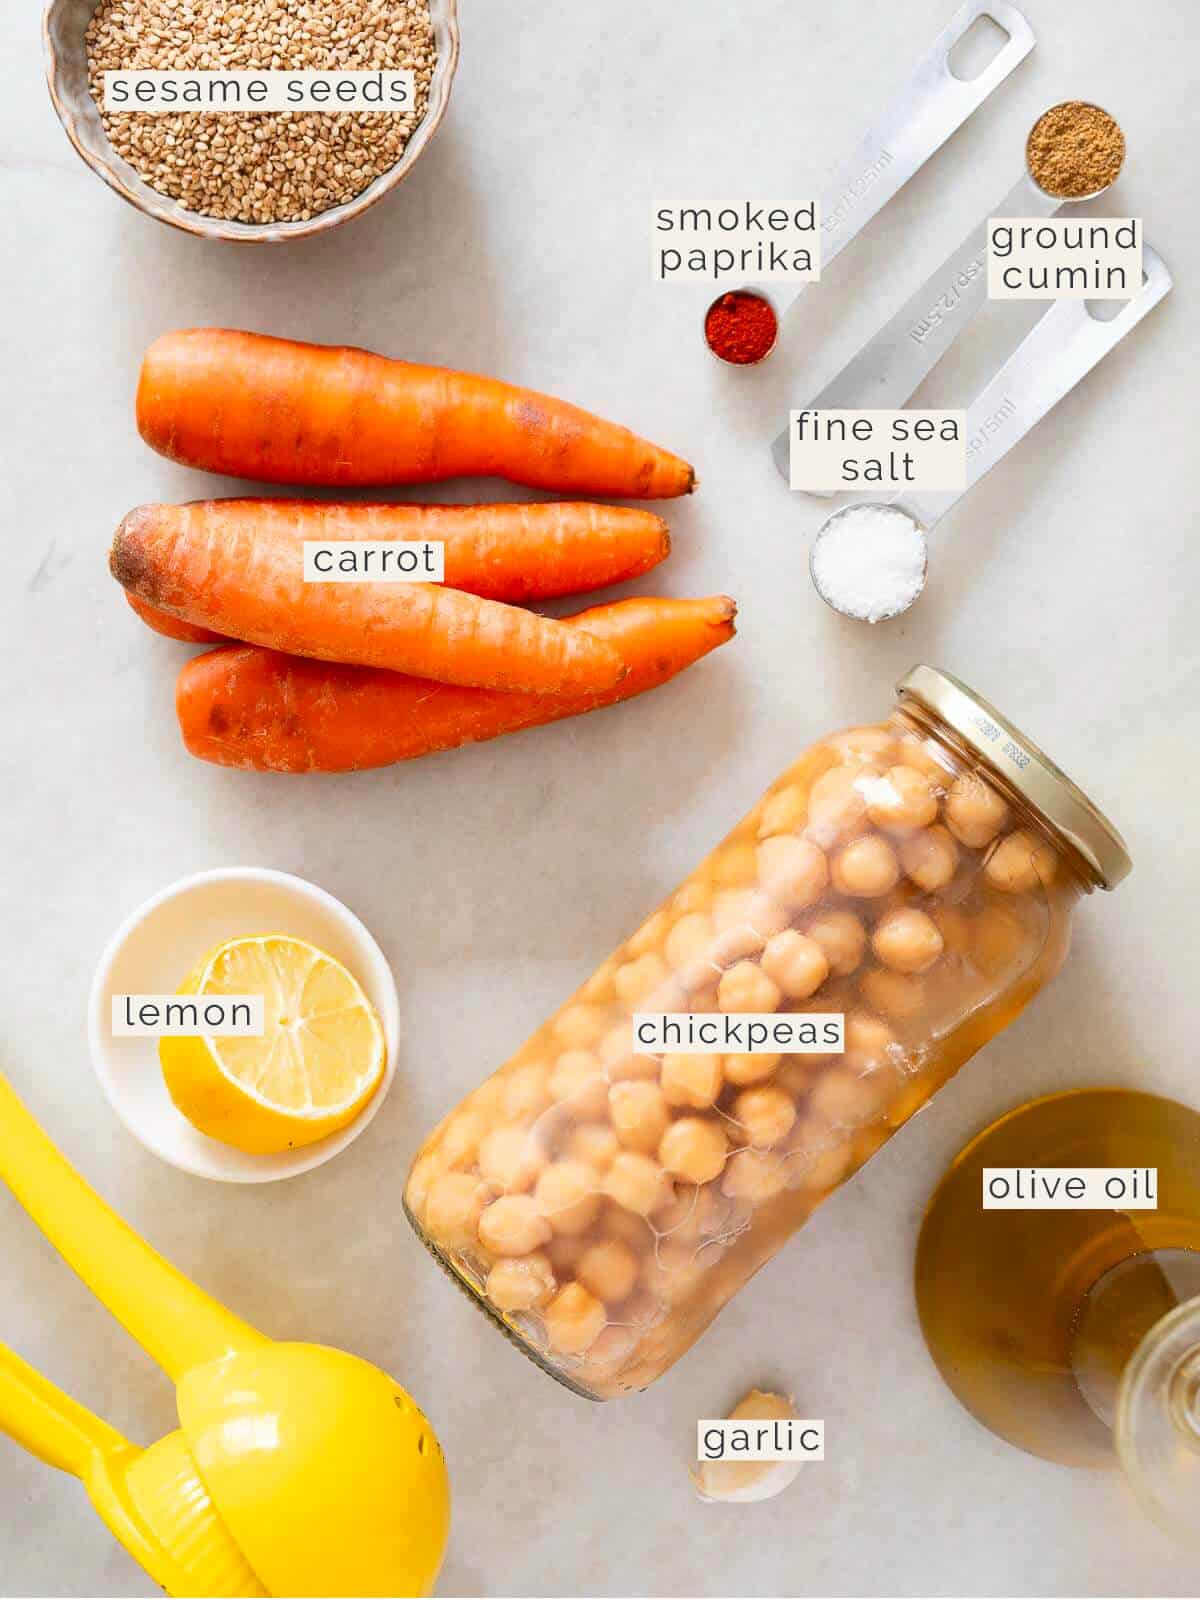 labeled ingredients to make carrot hummus without tahini.